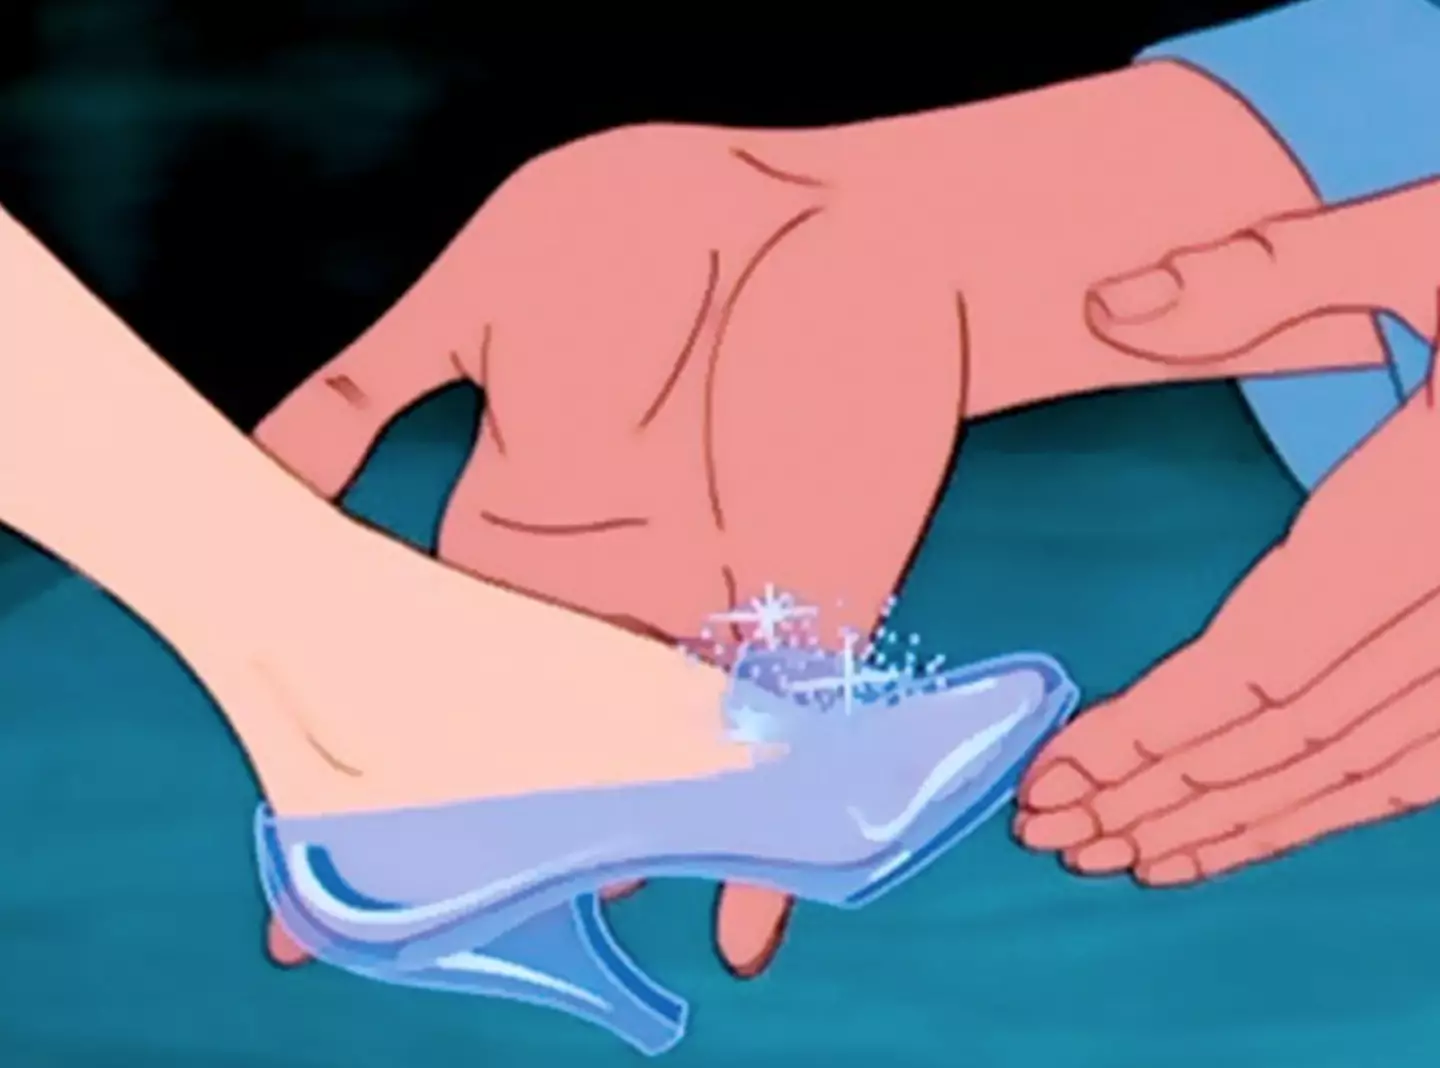 It's the glass slippers which cause some issues (